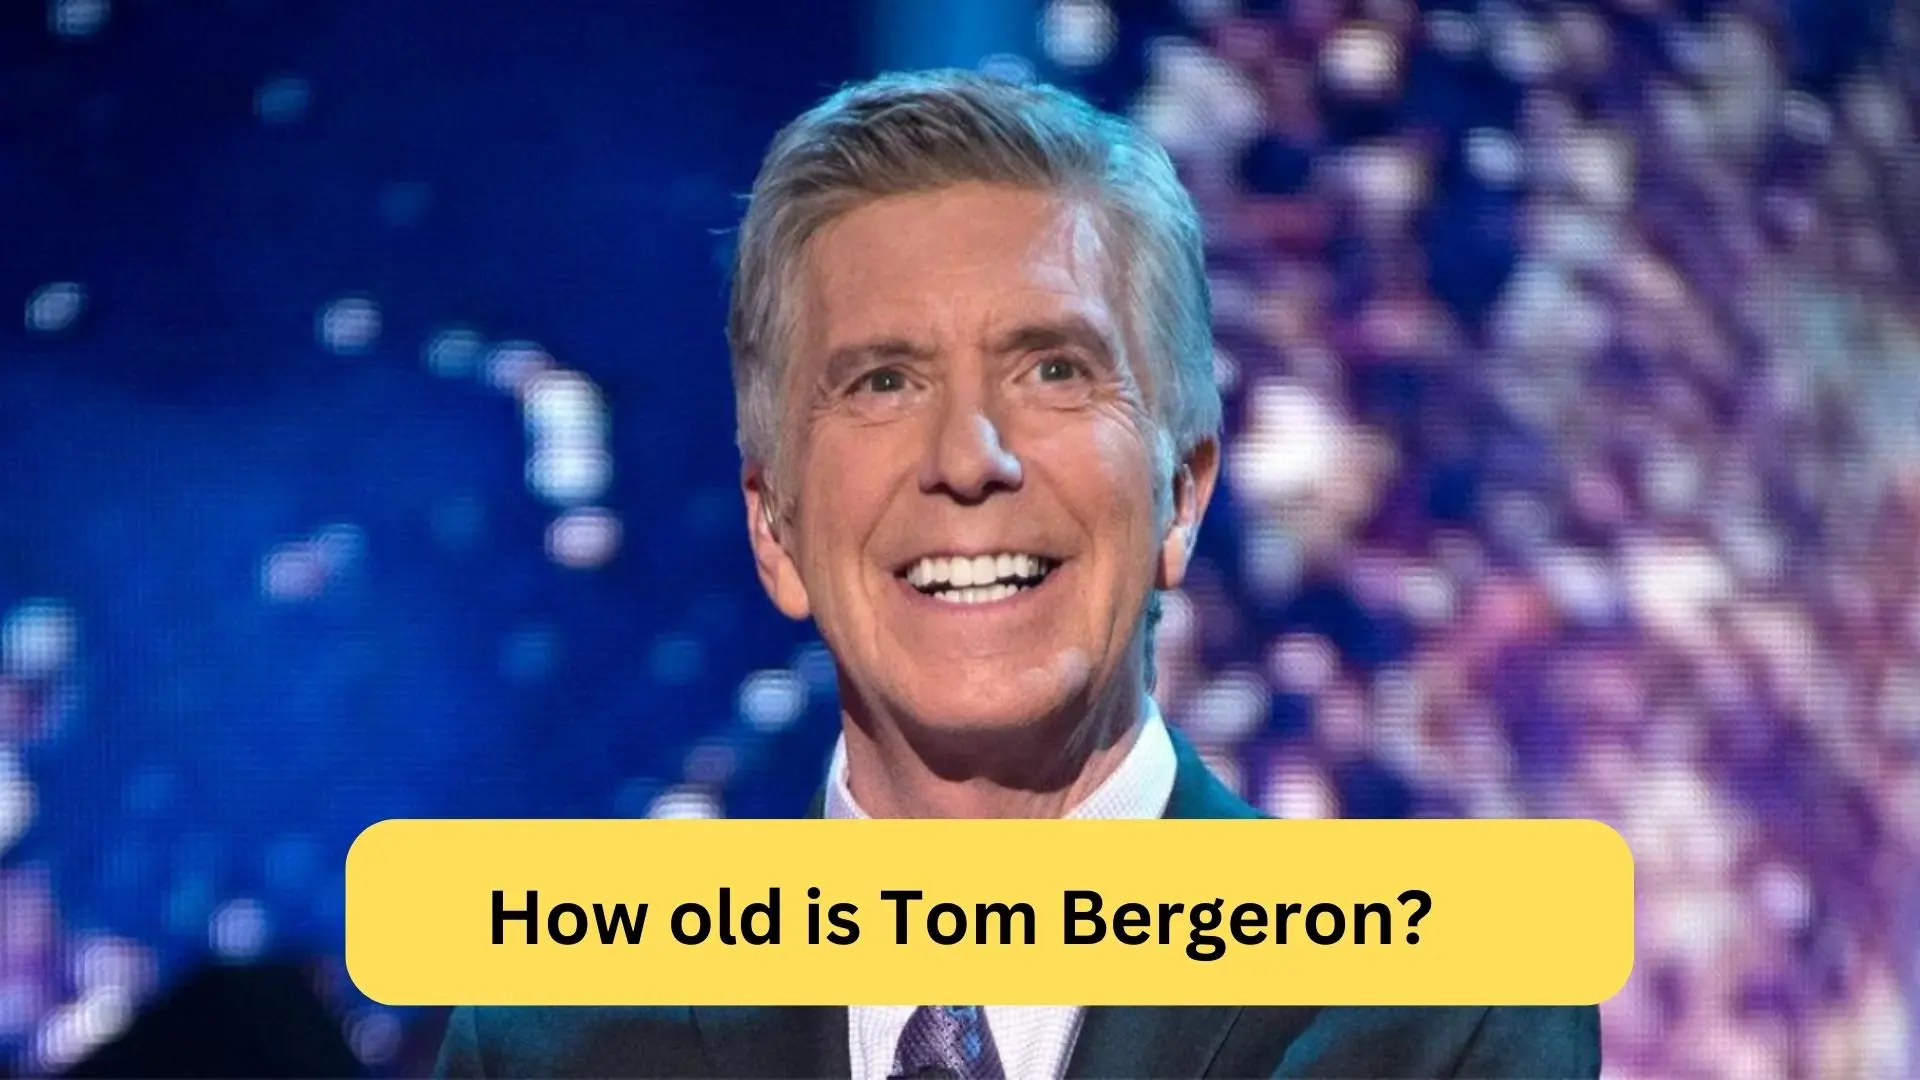 How old is Tom Bergeron